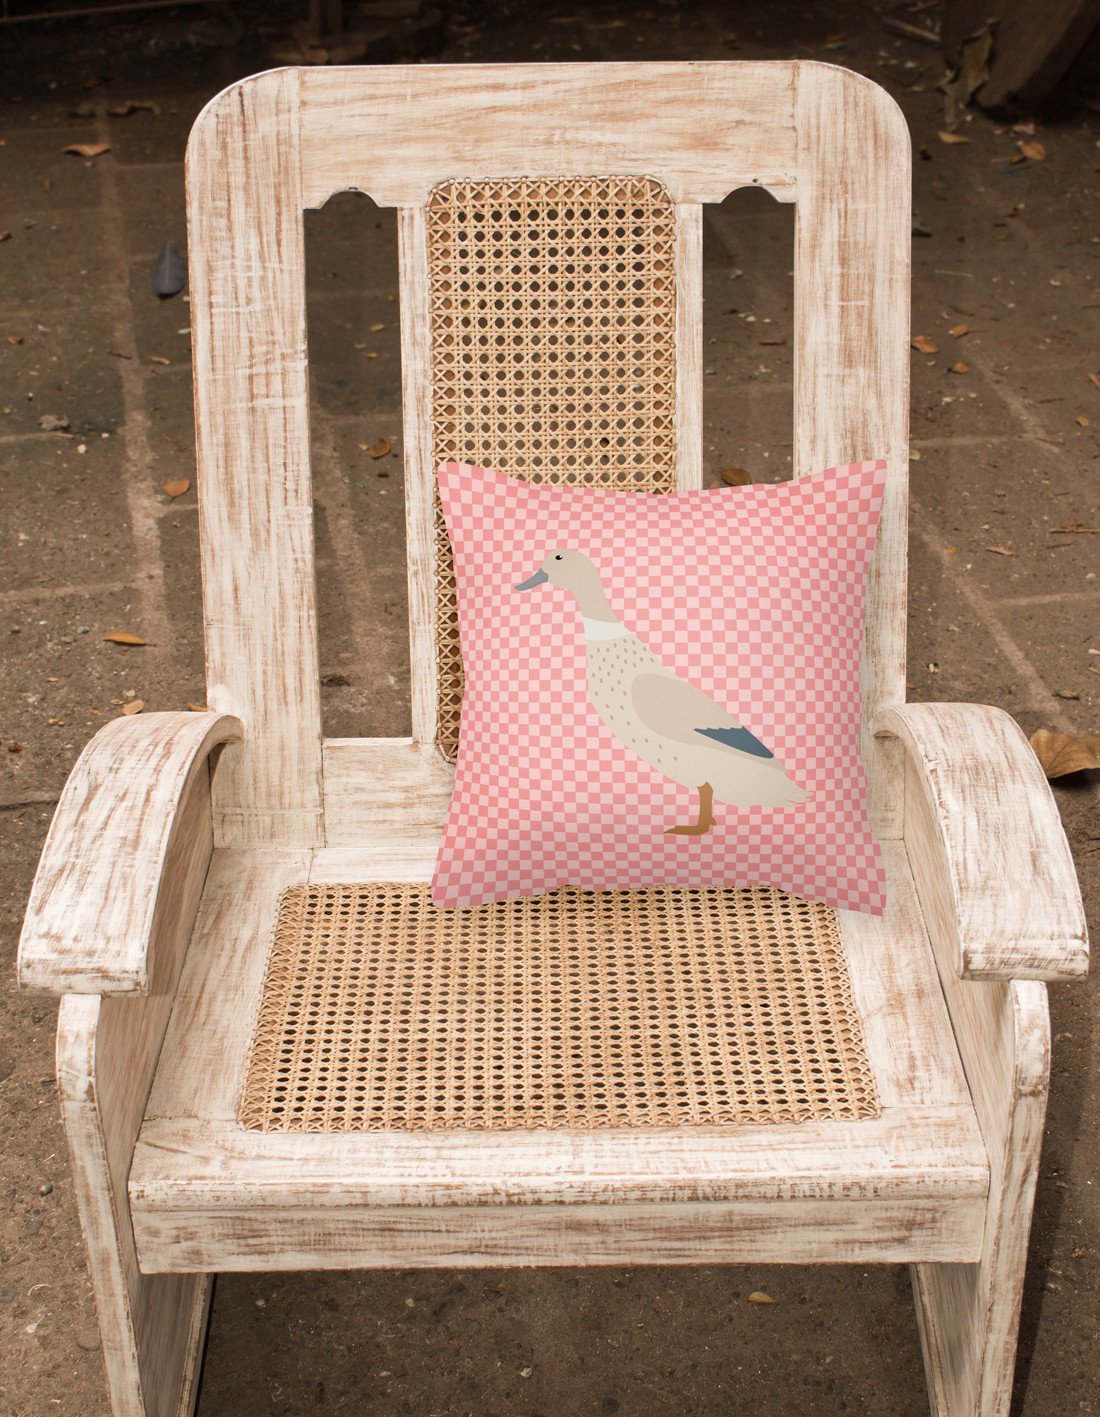 West Harlequin Duck Pink Check Fabric Decorative Pillow BB7858PW1818 by Caroline's Treasures